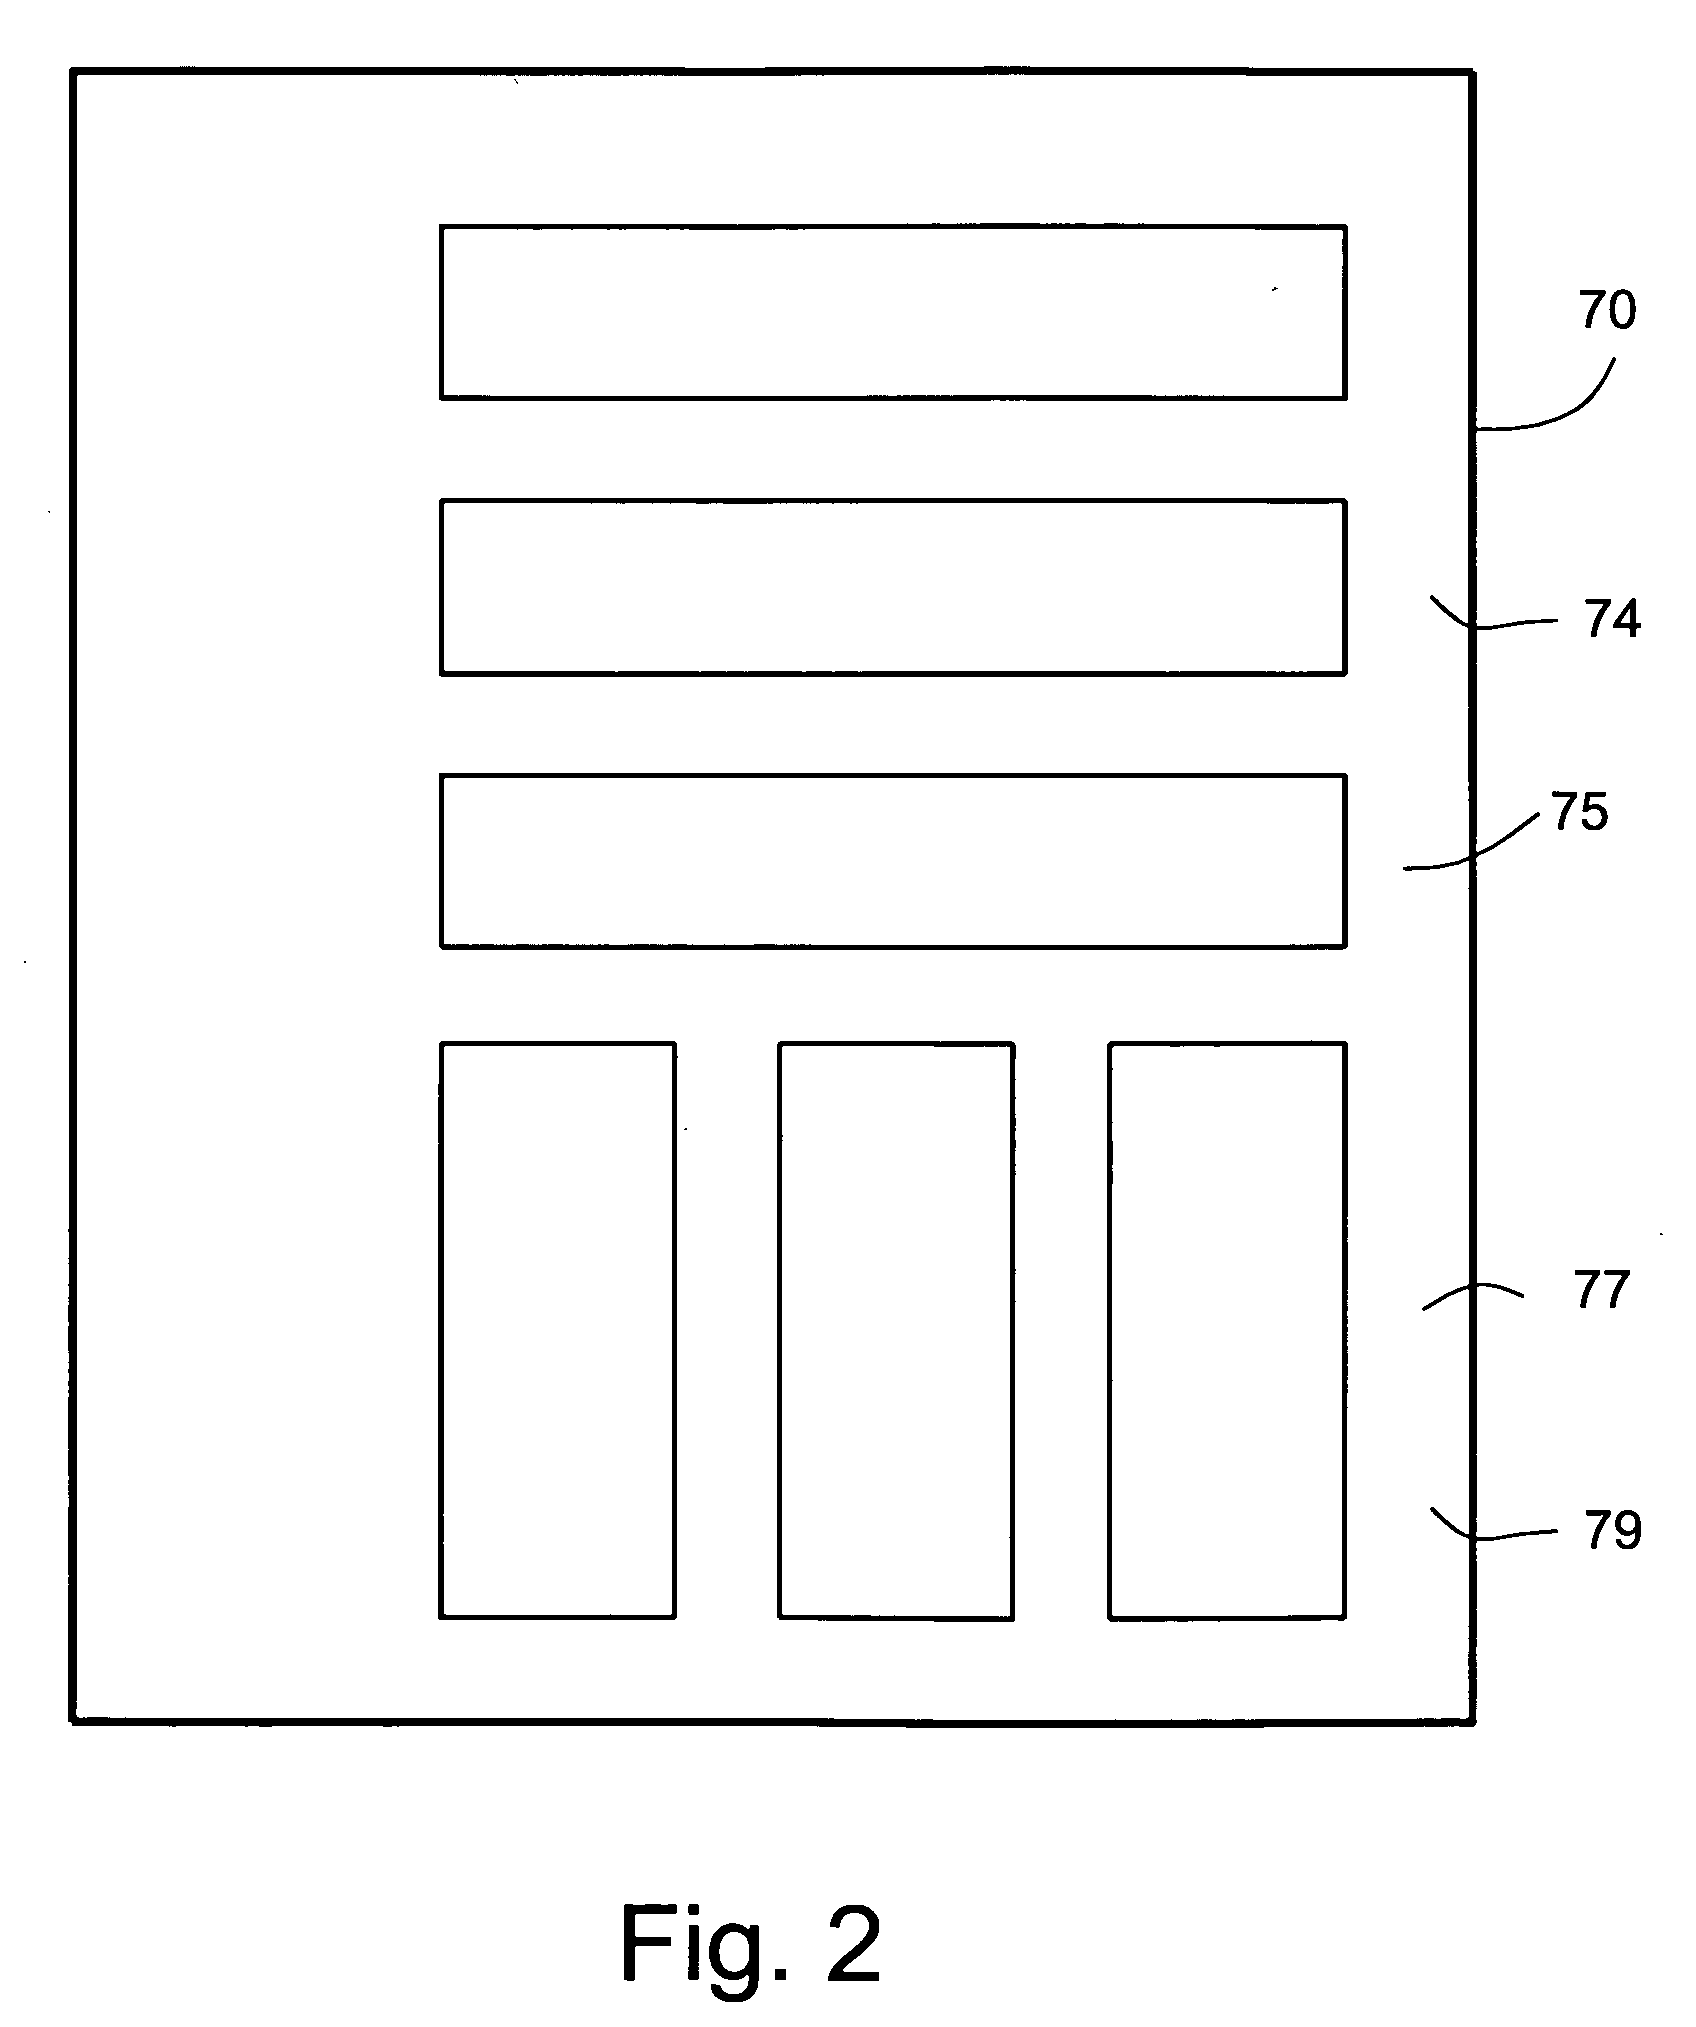 Device and method for fecal testing